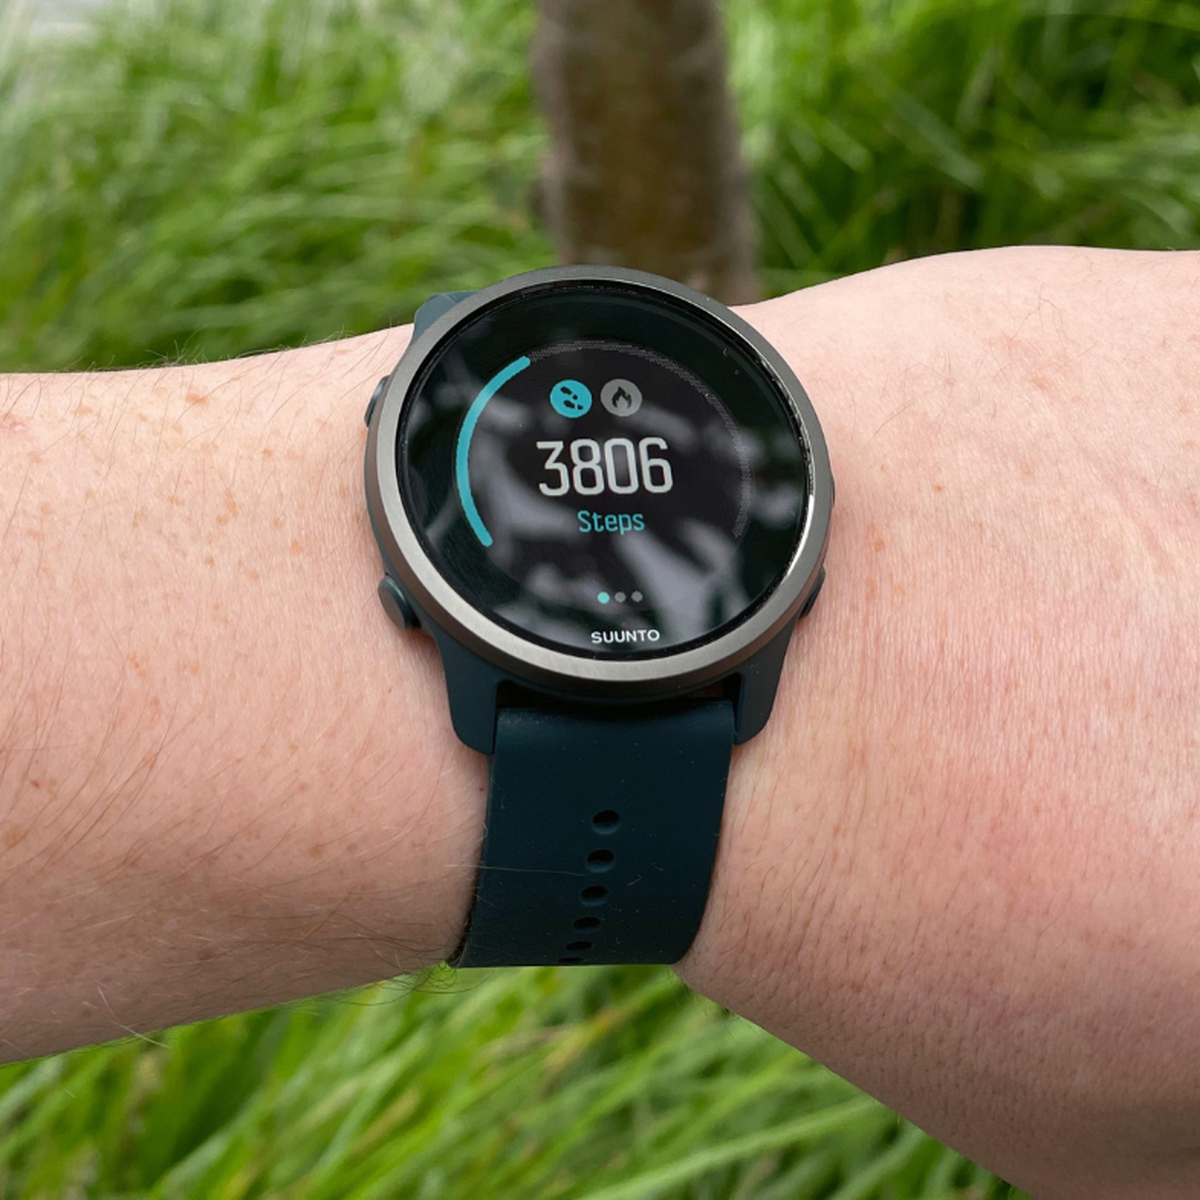 Suunto 5 smartwatch review: Pricing, features, speed, screen, A 'comfortable and light' watch